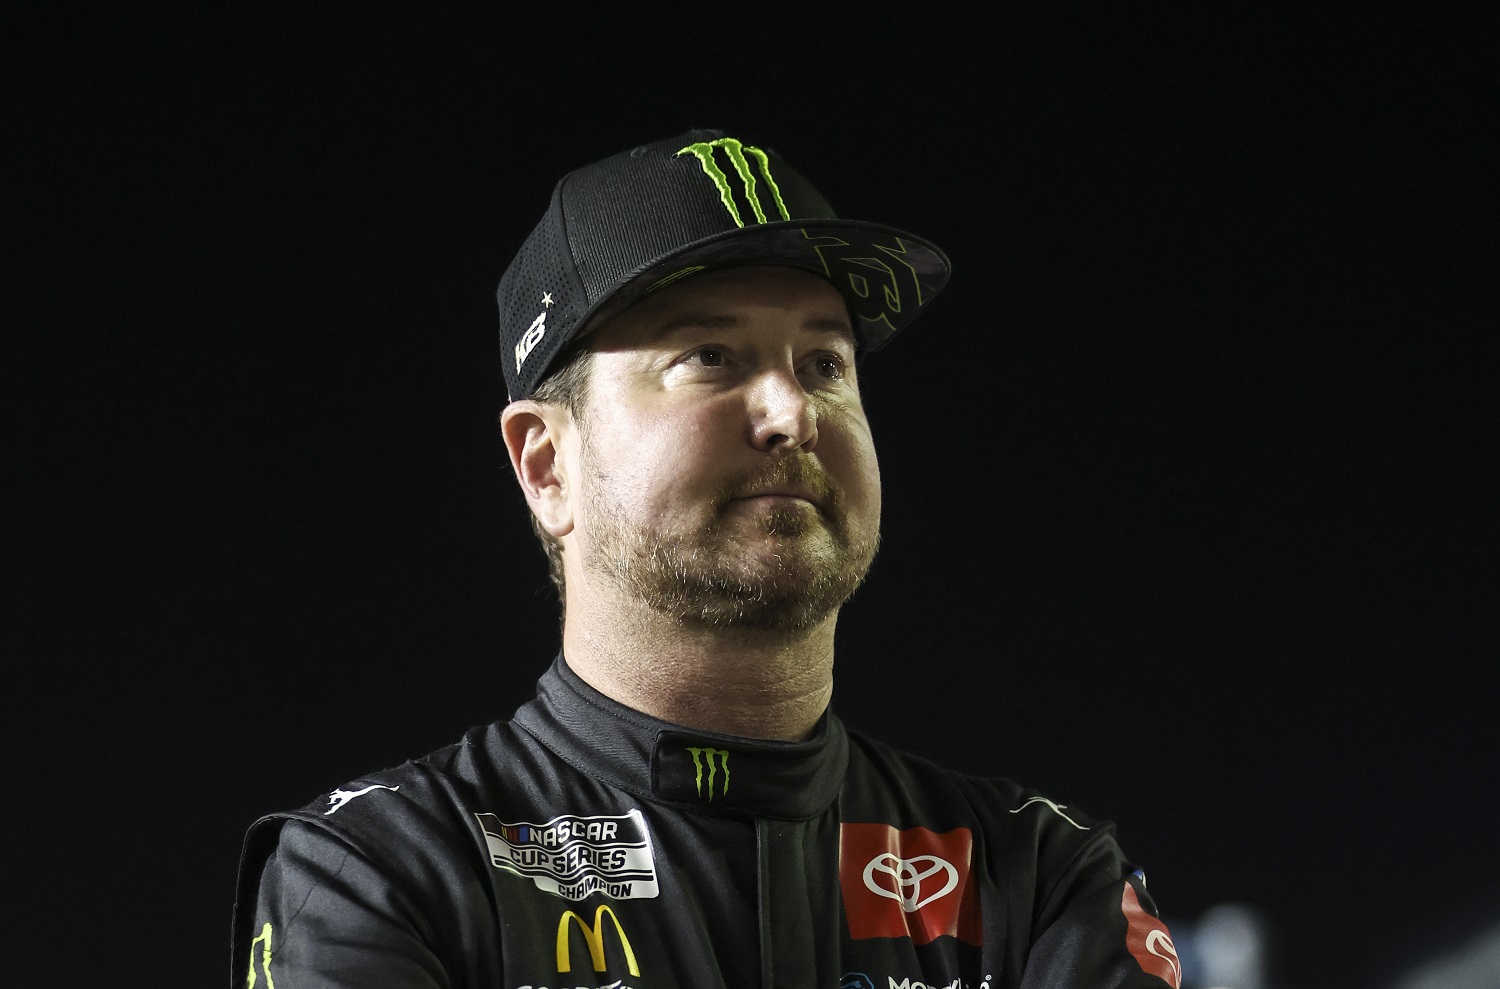 Kurt Busch’s Woes Confirm 23XI Racing Is So 2021ish Compared to